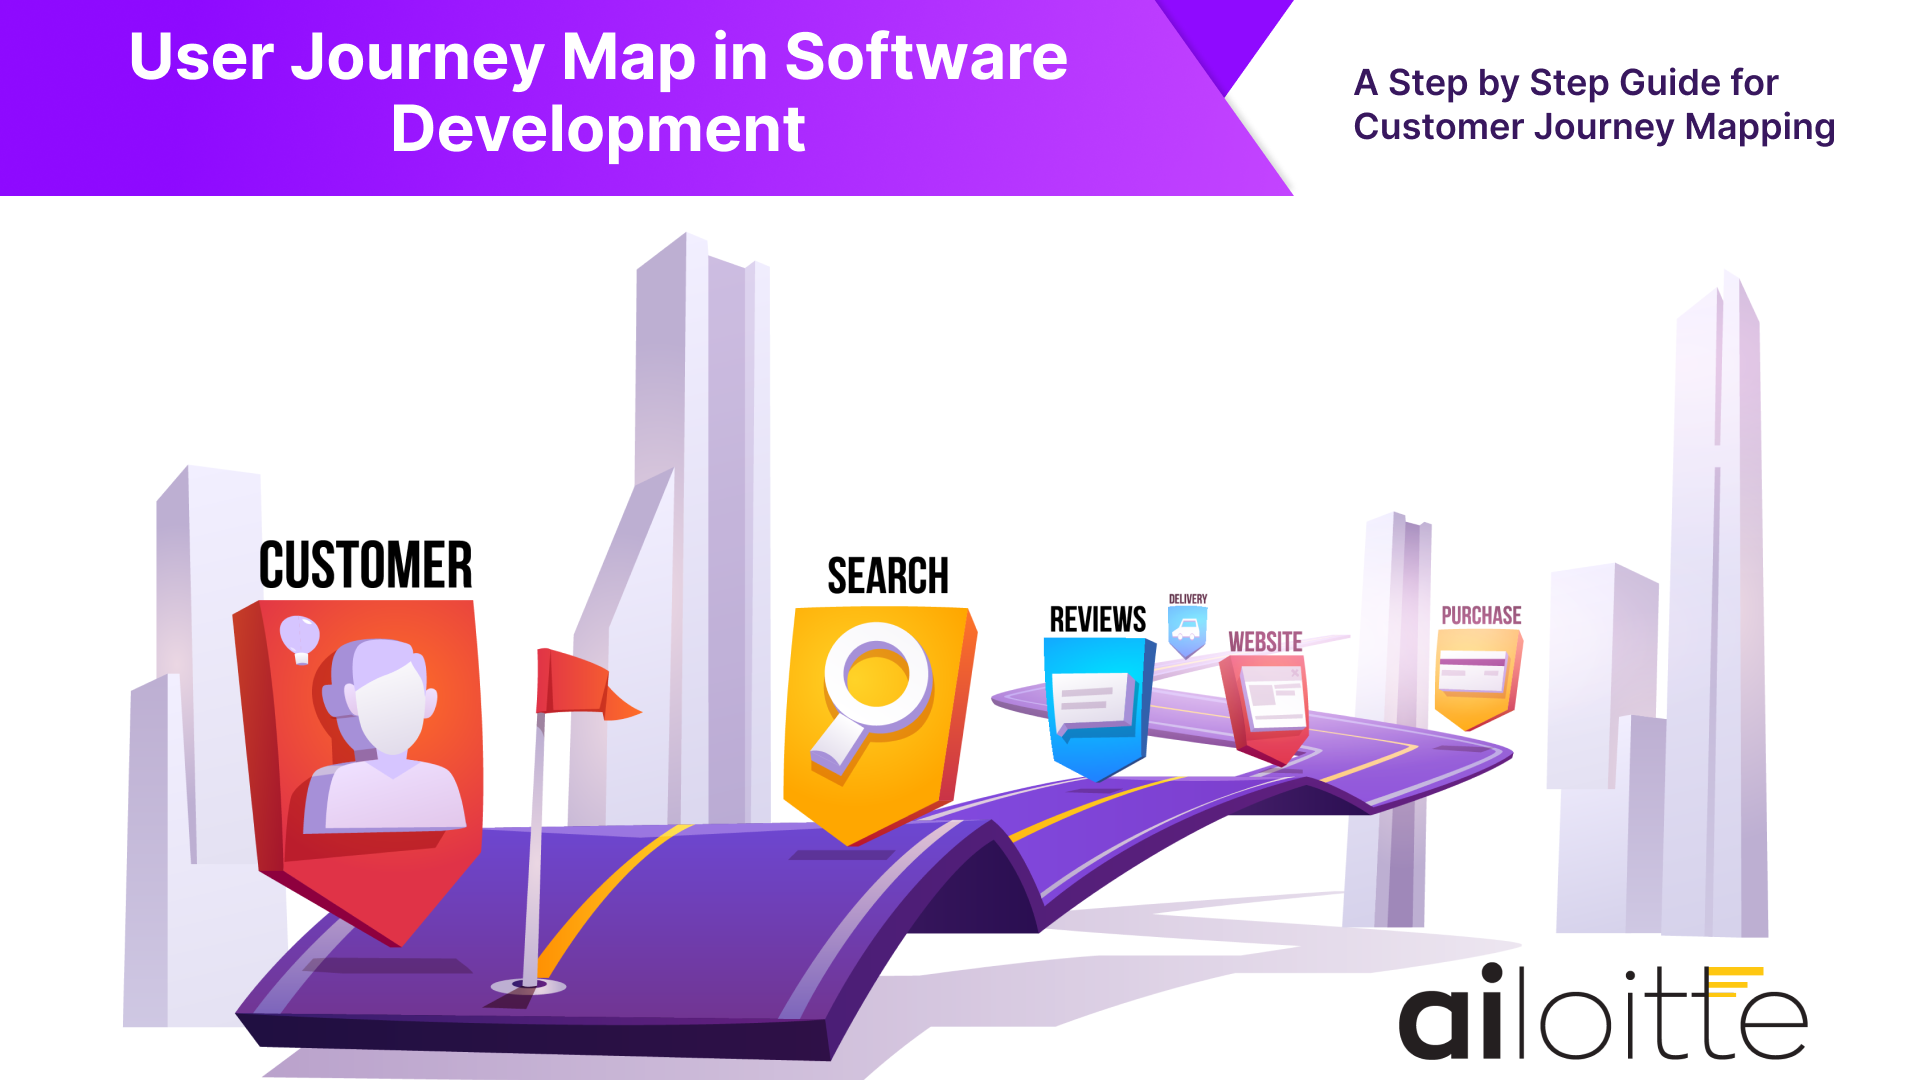 User Journey Map in Software Development: a Step by Step Guide for Customer Journey Mapping